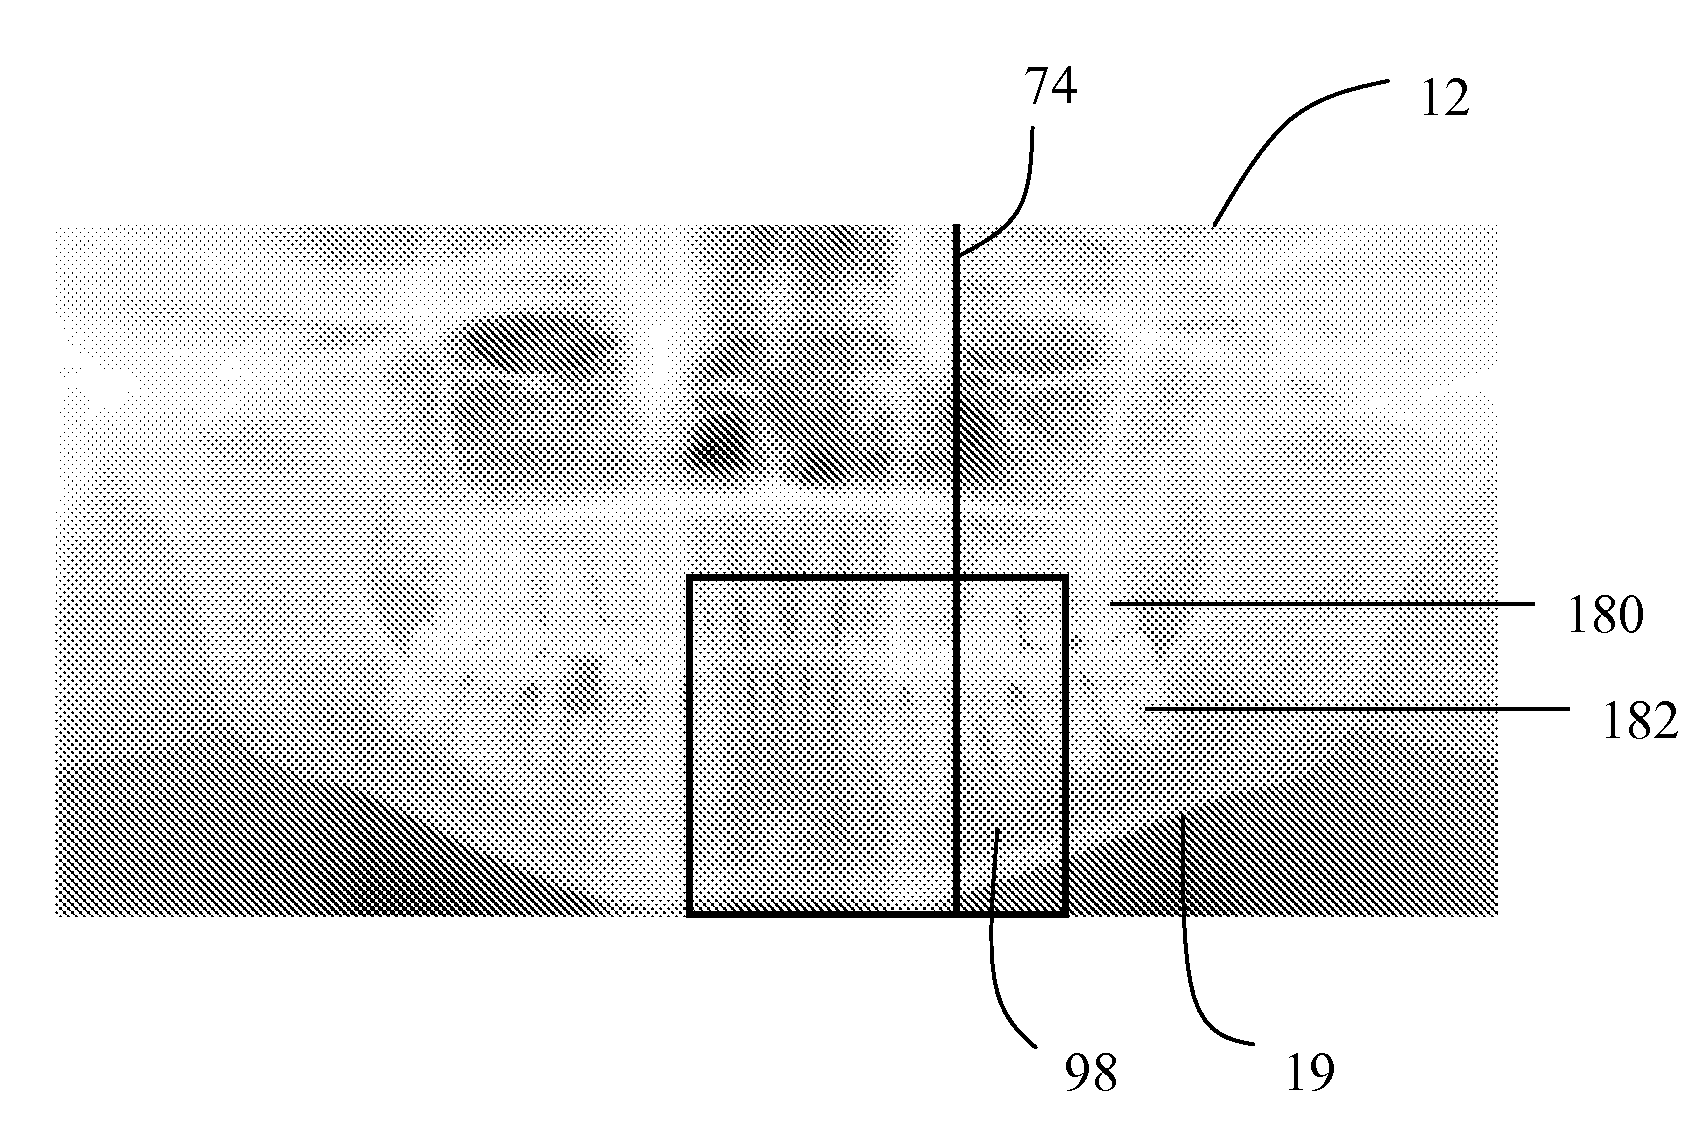 Dental extra-oral x-ray imaging system and method